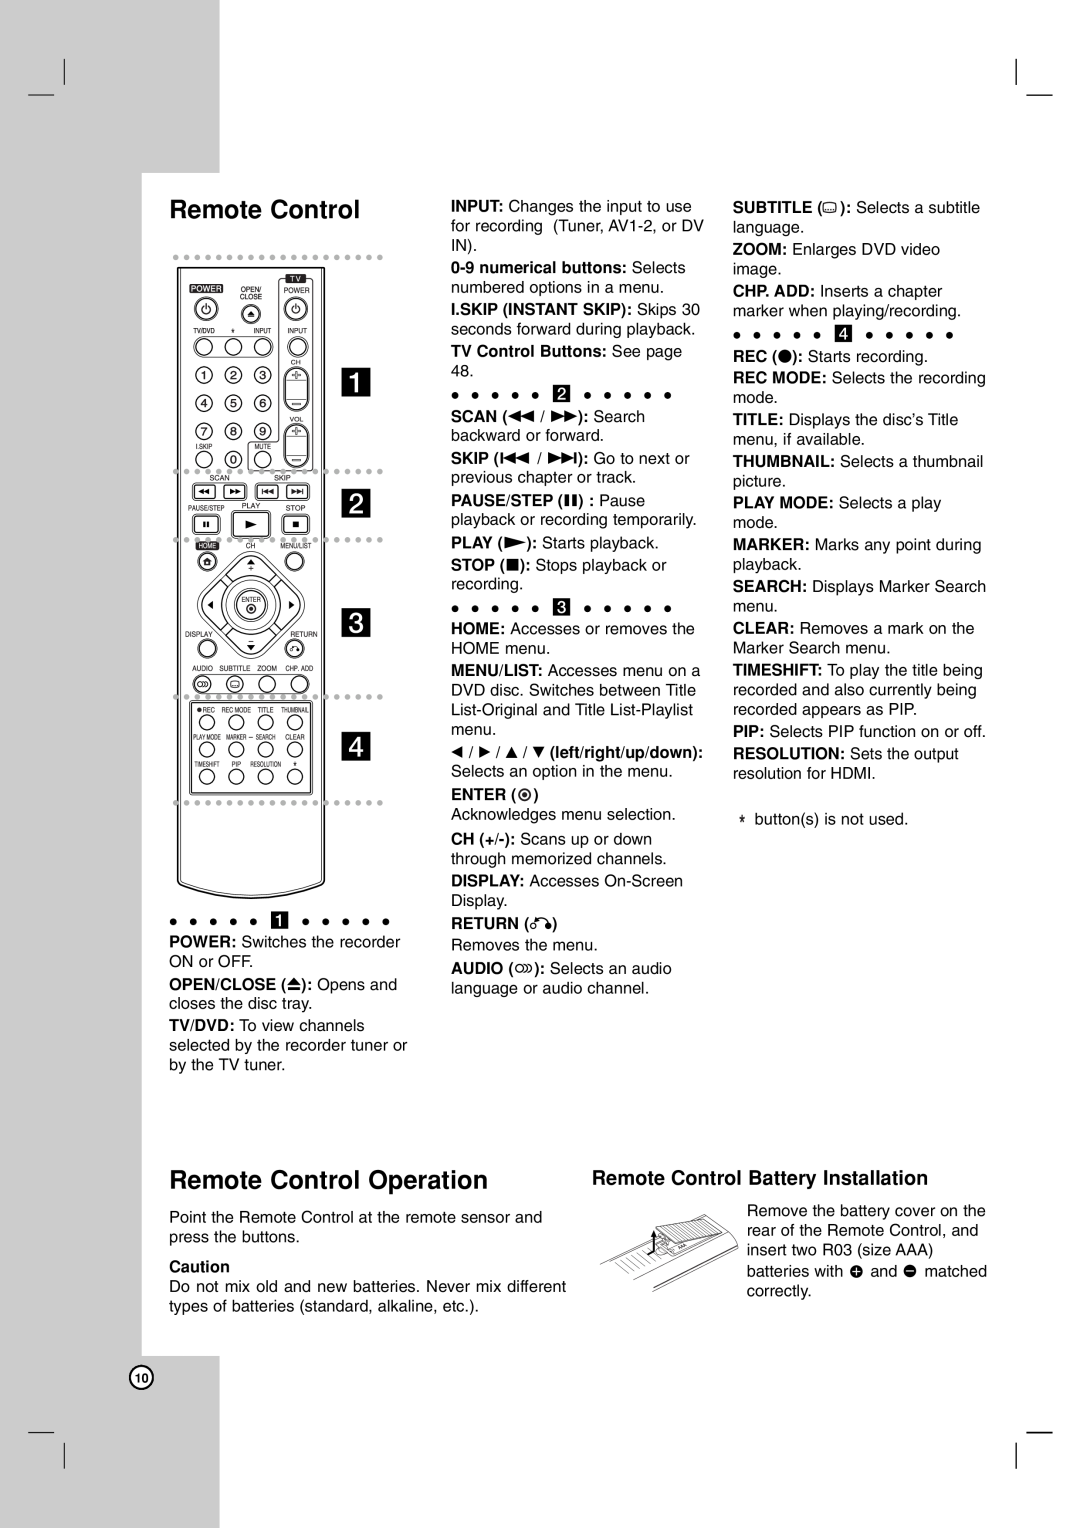 LG Electronics DR1F9H Remote Control Operation, Remote Control Battery Installation, TV Control Buttons See page, menu 